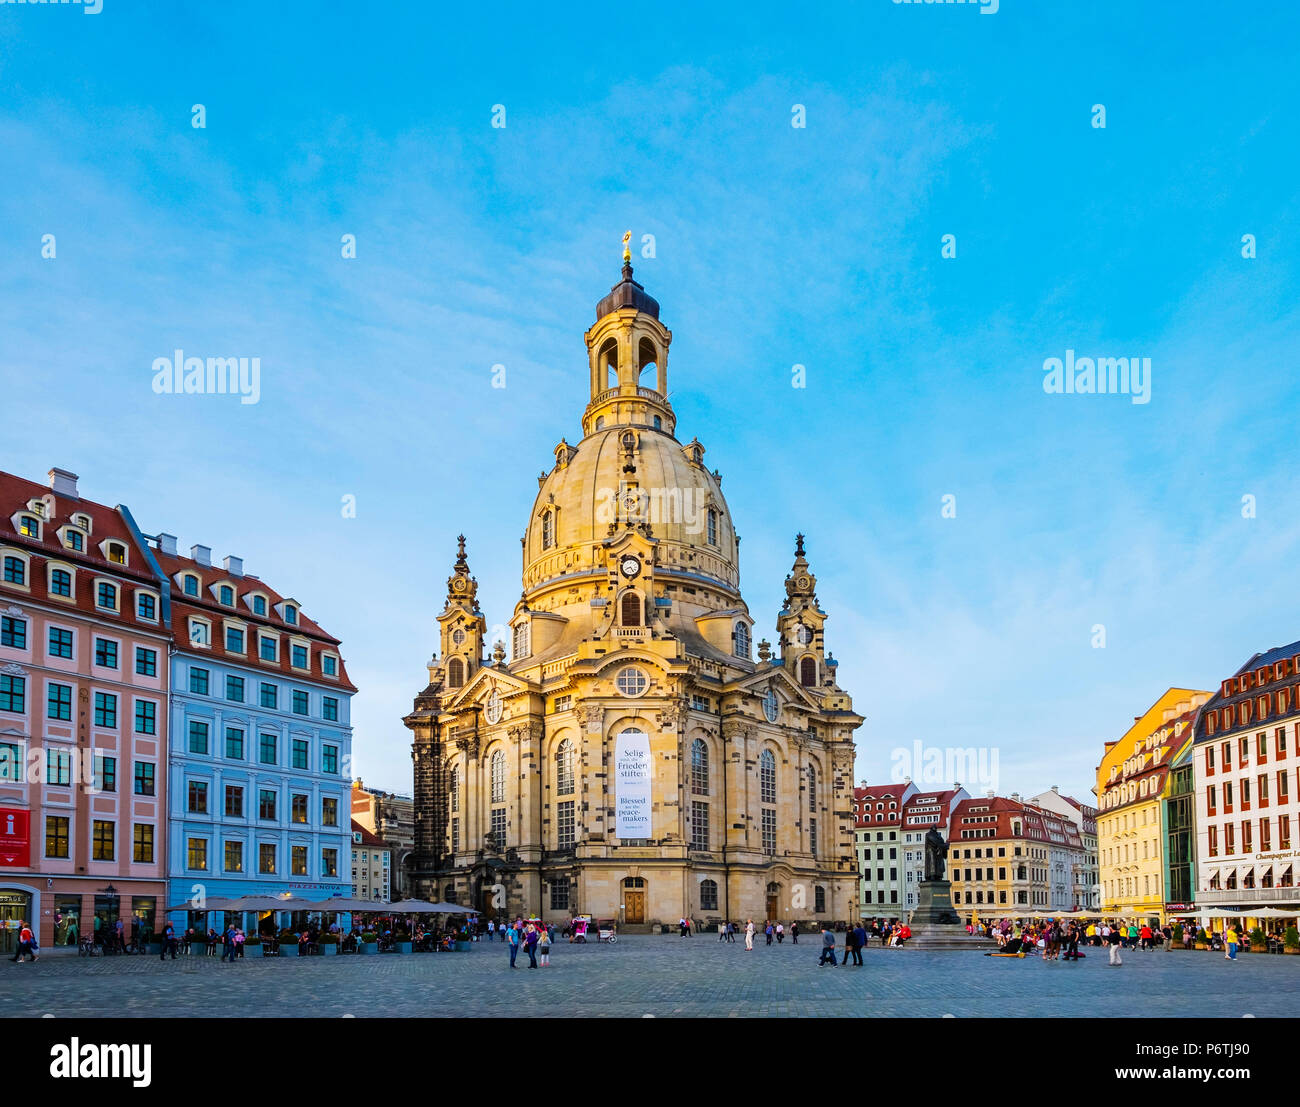 Germany, Saxony, Dresden, Altstadt (Old Town). Dresdner Frauenkirche (Church of Our Lady) and buildings on the Neumarkt. Stock Photo